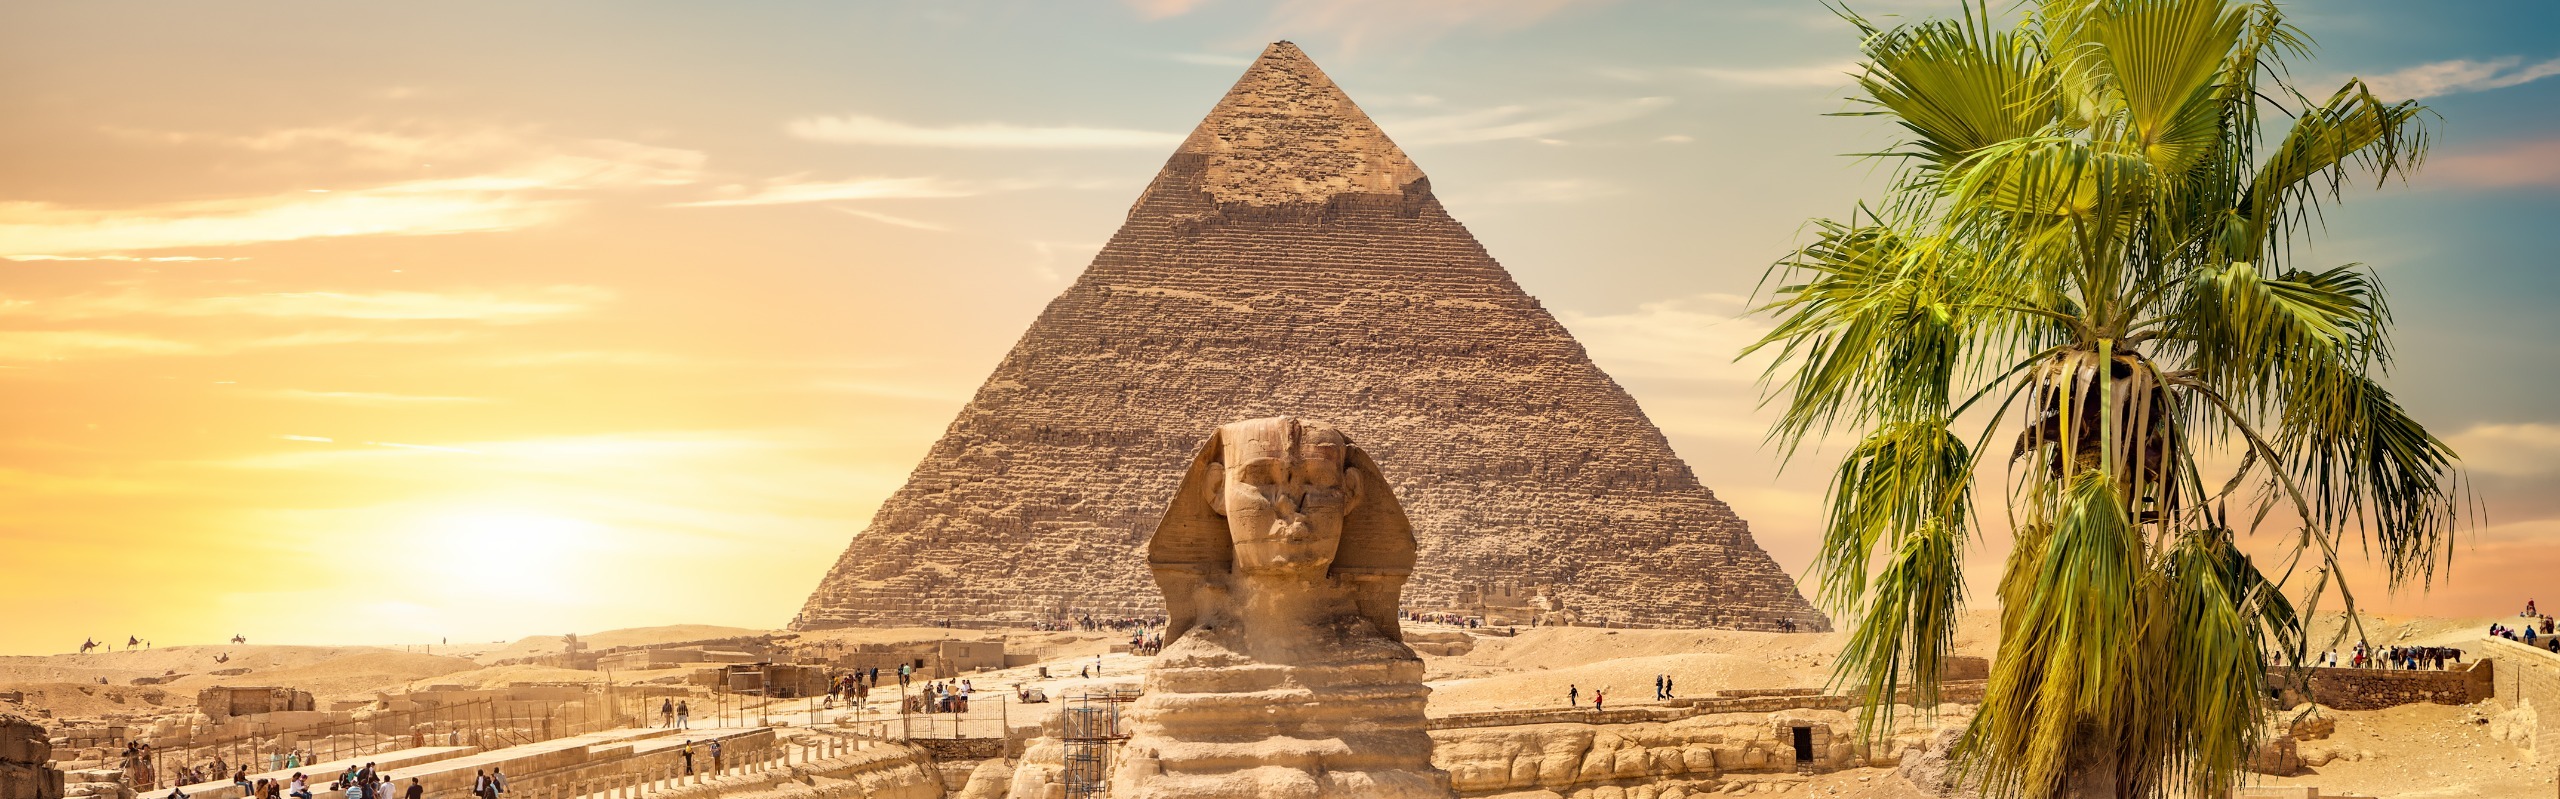 The Egyptian Pyramids: Facts, Inside, Location...